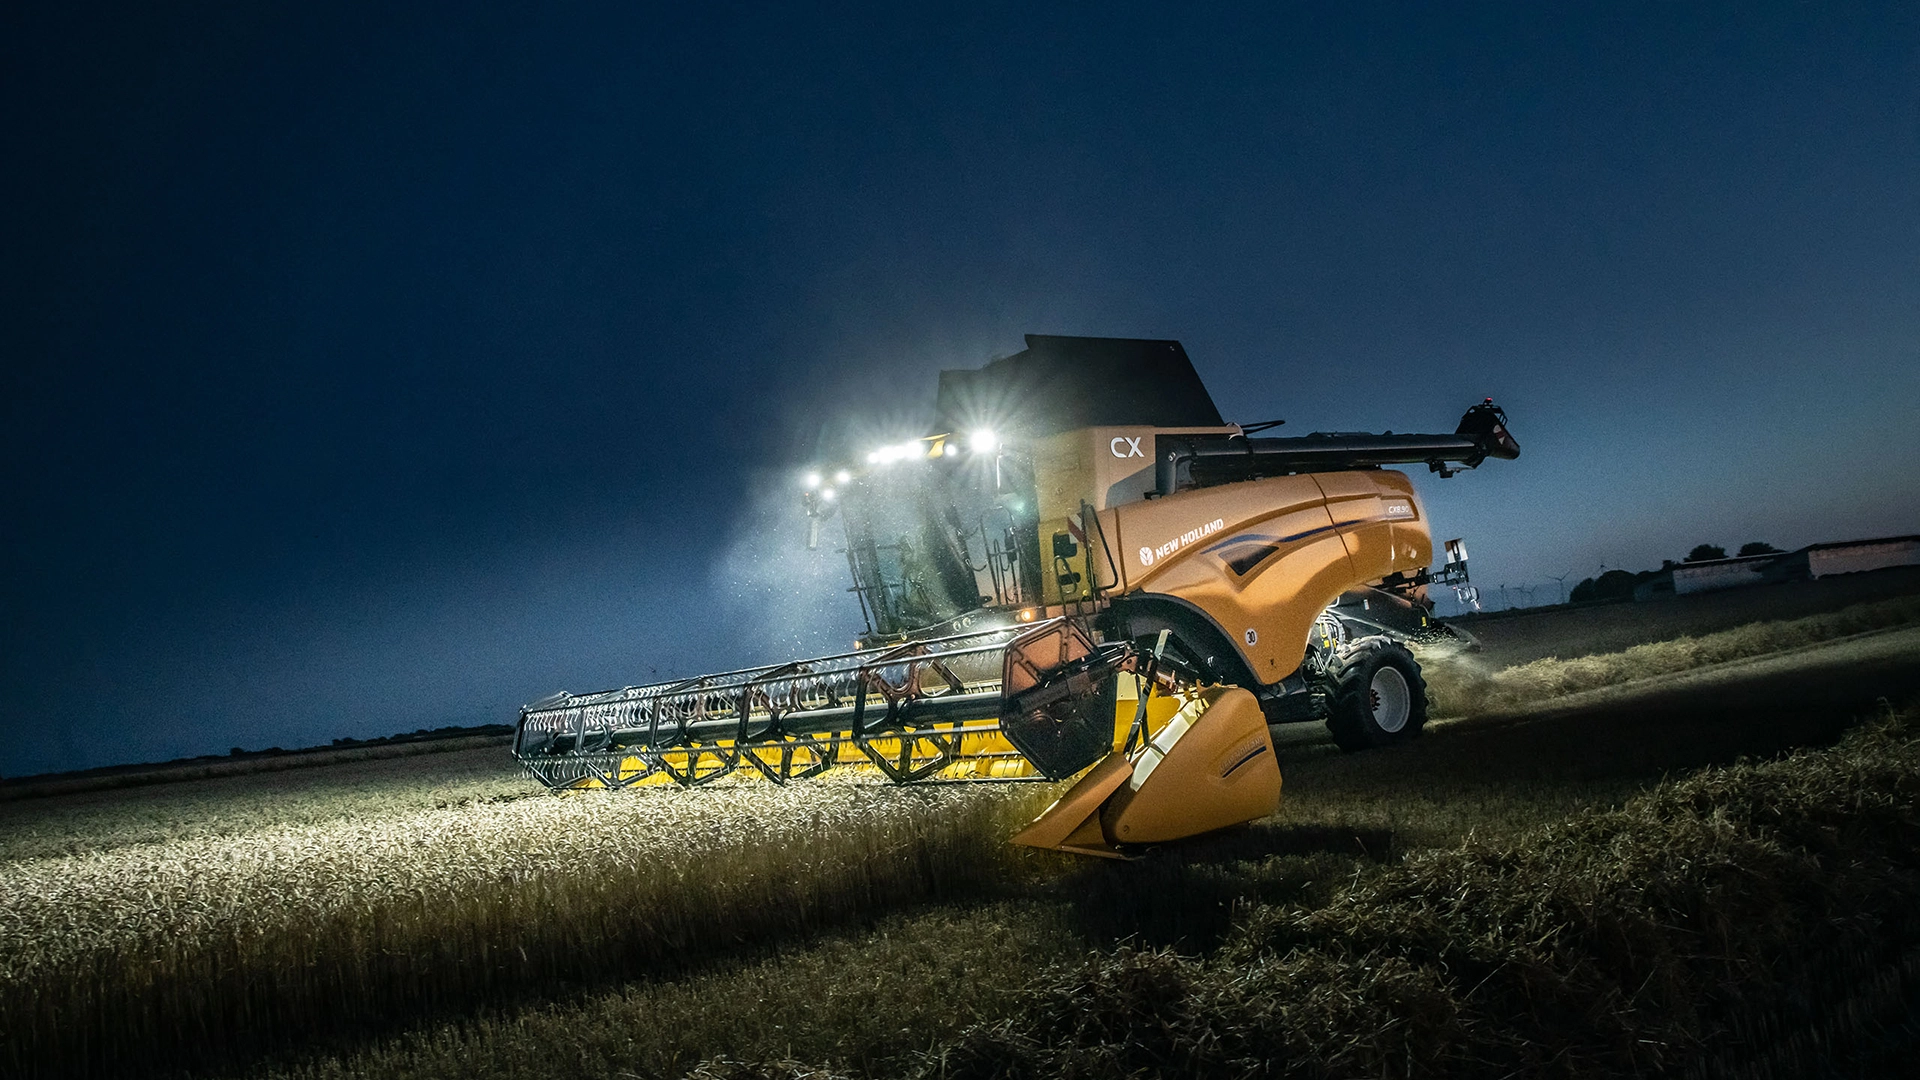 CX7 ＆ CX8 Combine Harvesters working at night